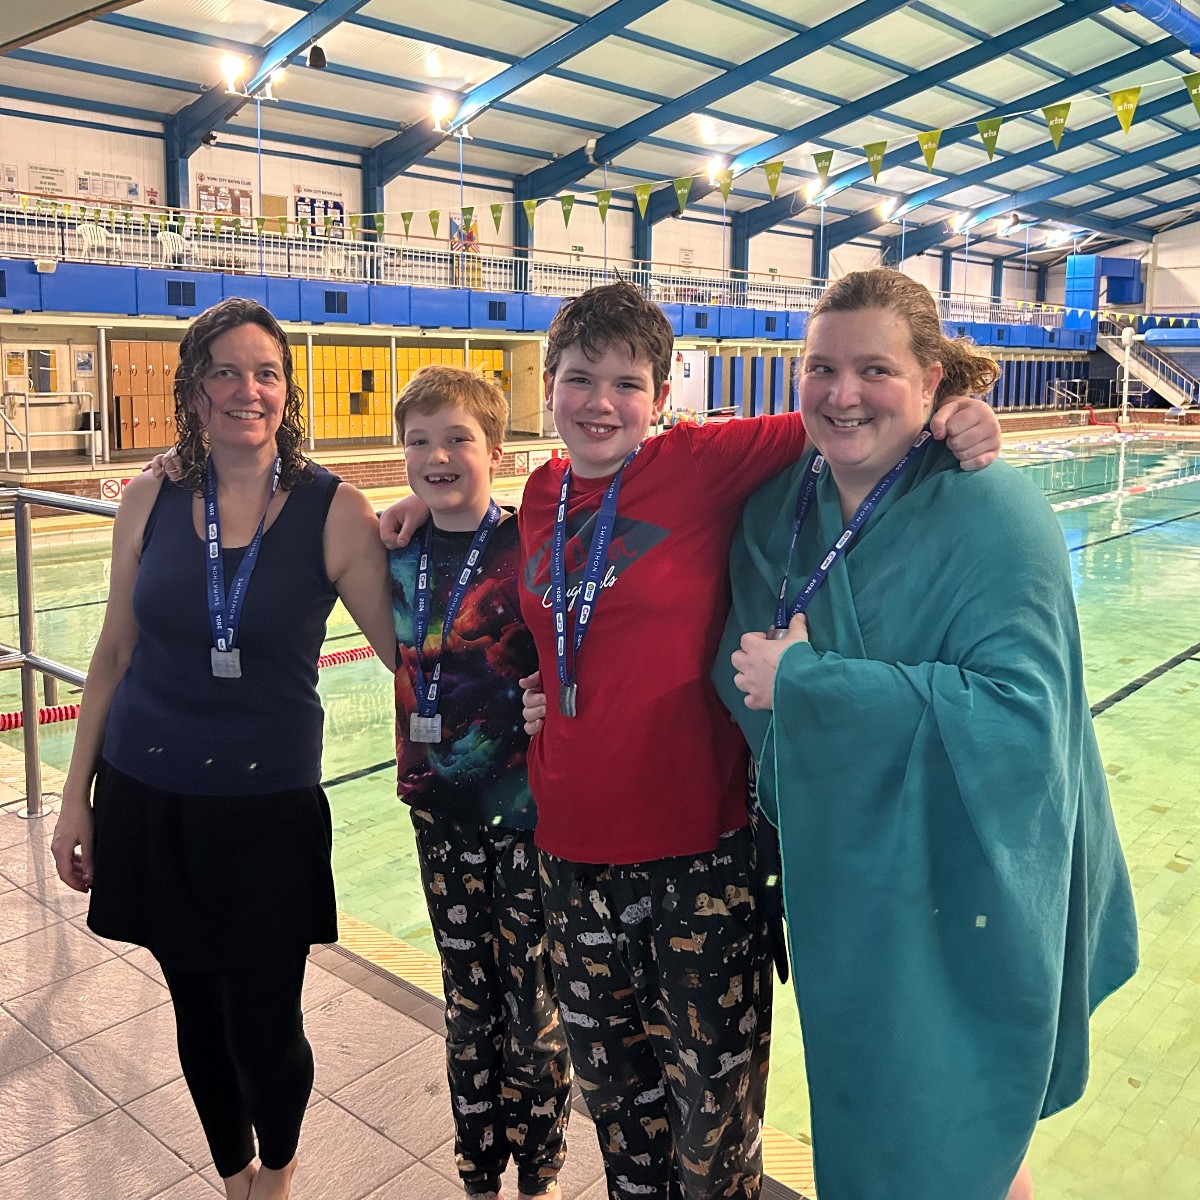 @Swimathon  2024 🏊 Team Swim: Billy, George, Vicky and Sarah took on the 5km challenge! They took on Swimathon for a fun challenge but also fundraising for those affected by cancer in their lives including Vicky who had cancer in 2020.